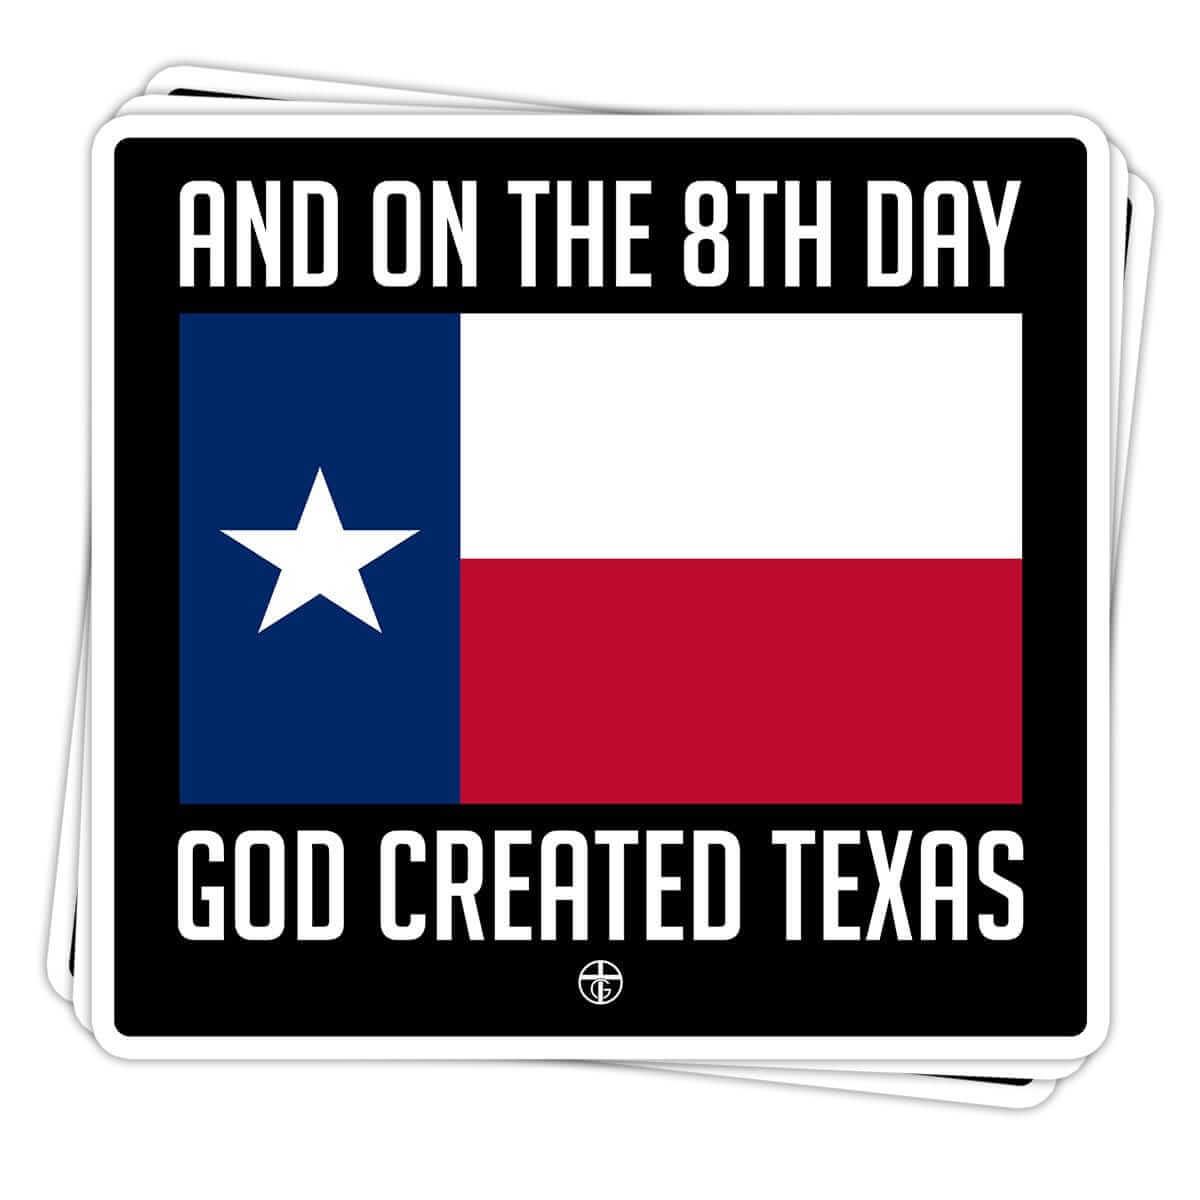 God Created Texas Decals - Our True God